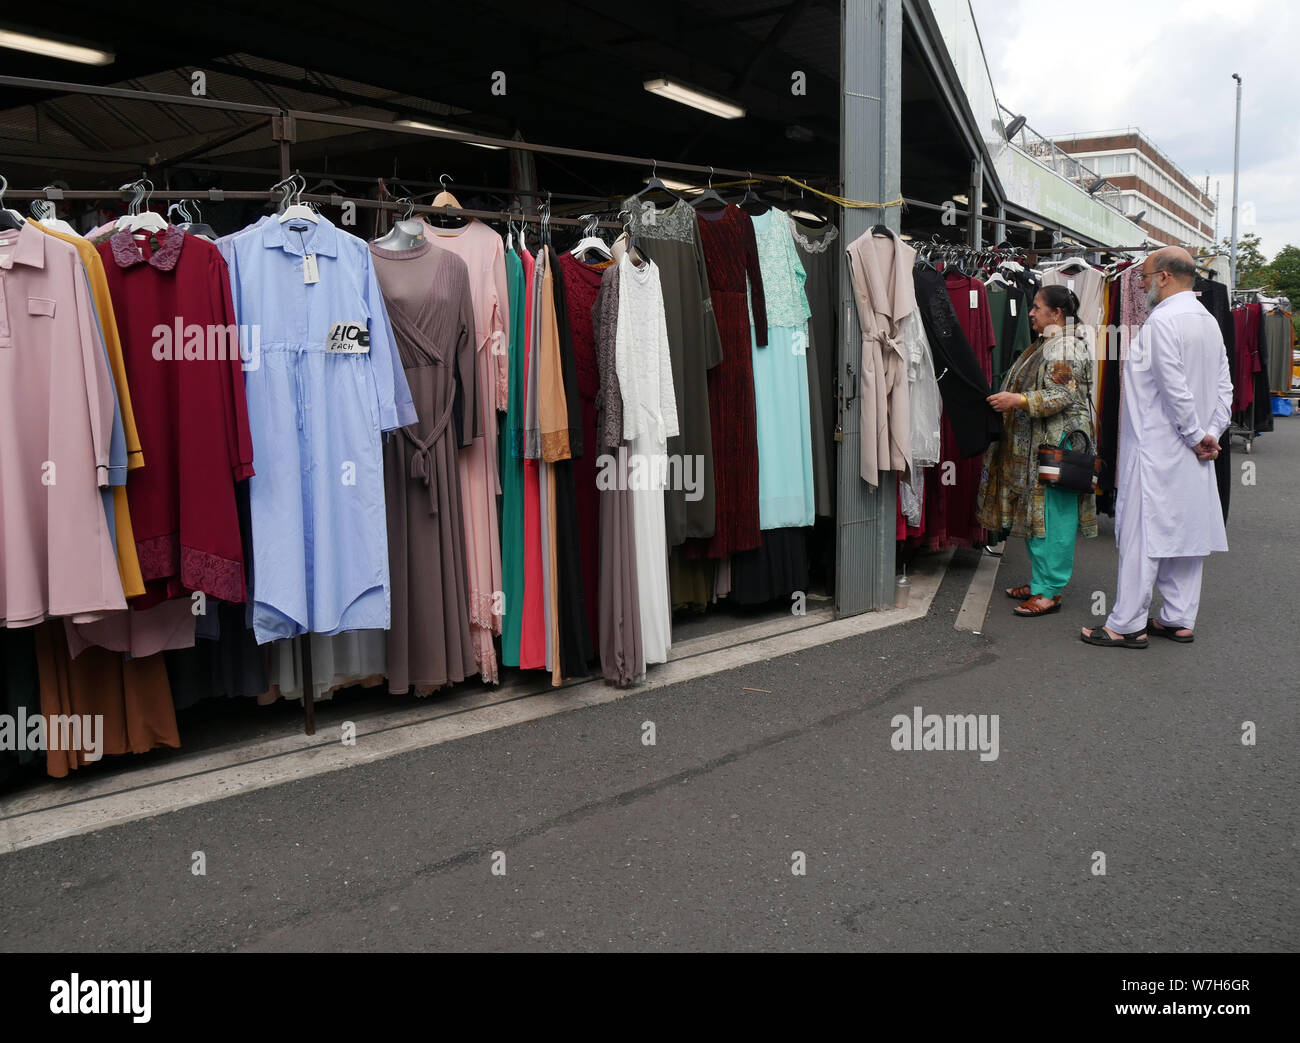 Shopping for Asian women's fashion and material on an outdoor market in Bolton, Lancashire, Greater Manchester, England UK, .  photo DON TONGE Stock Photo